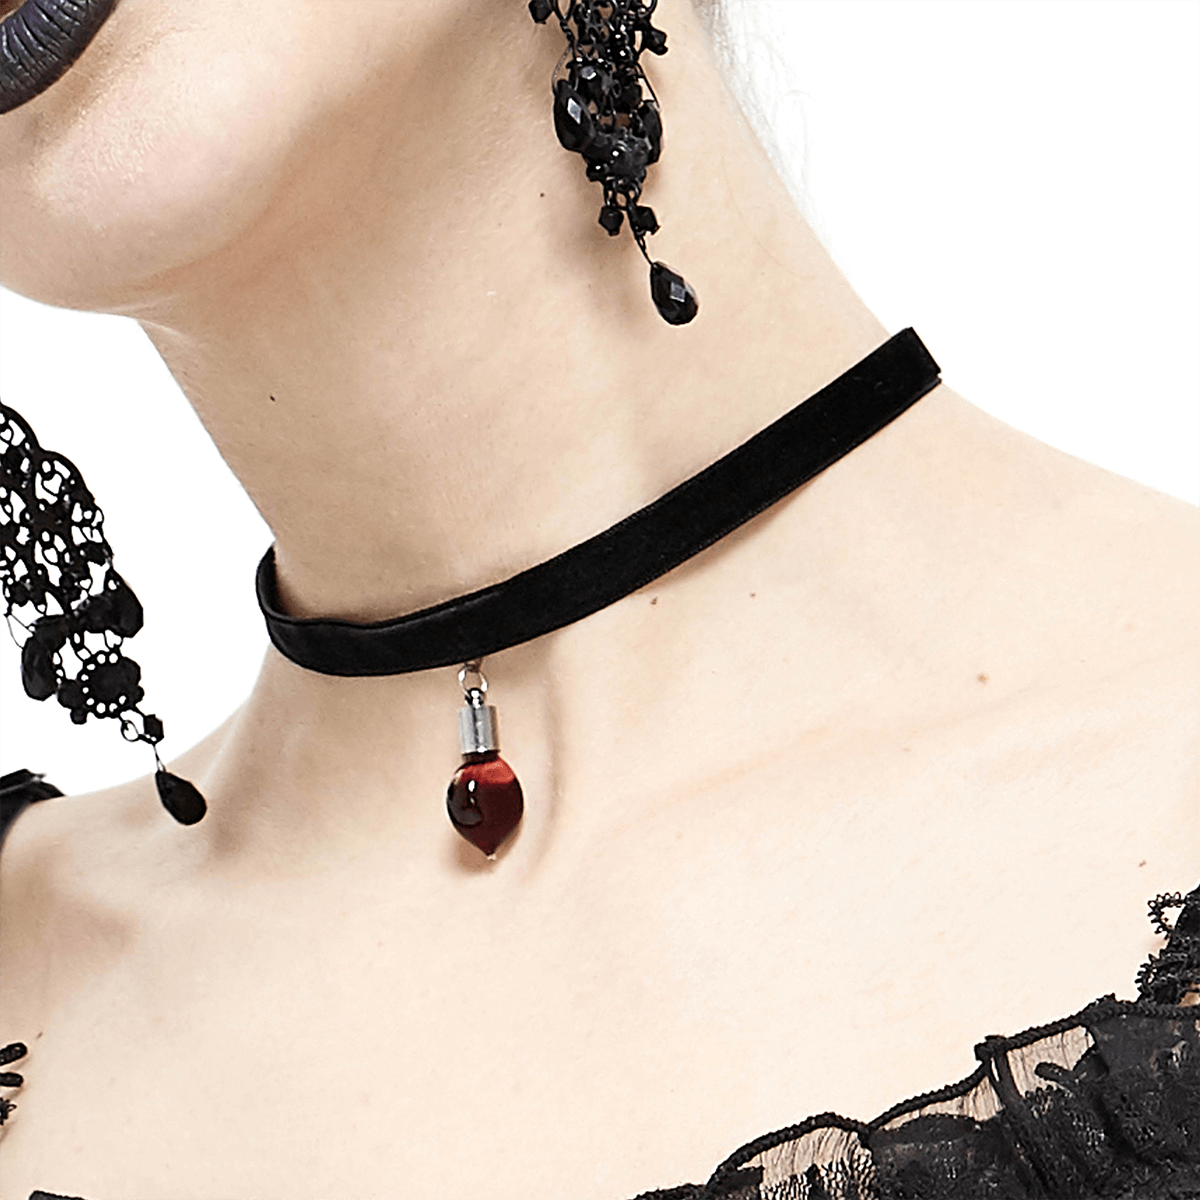 Black Leather Choker Necklace for Women Choker With Golden Buckle Choker Sexy  Choker Punk Gift for Girlfriend Made in Ukraine 